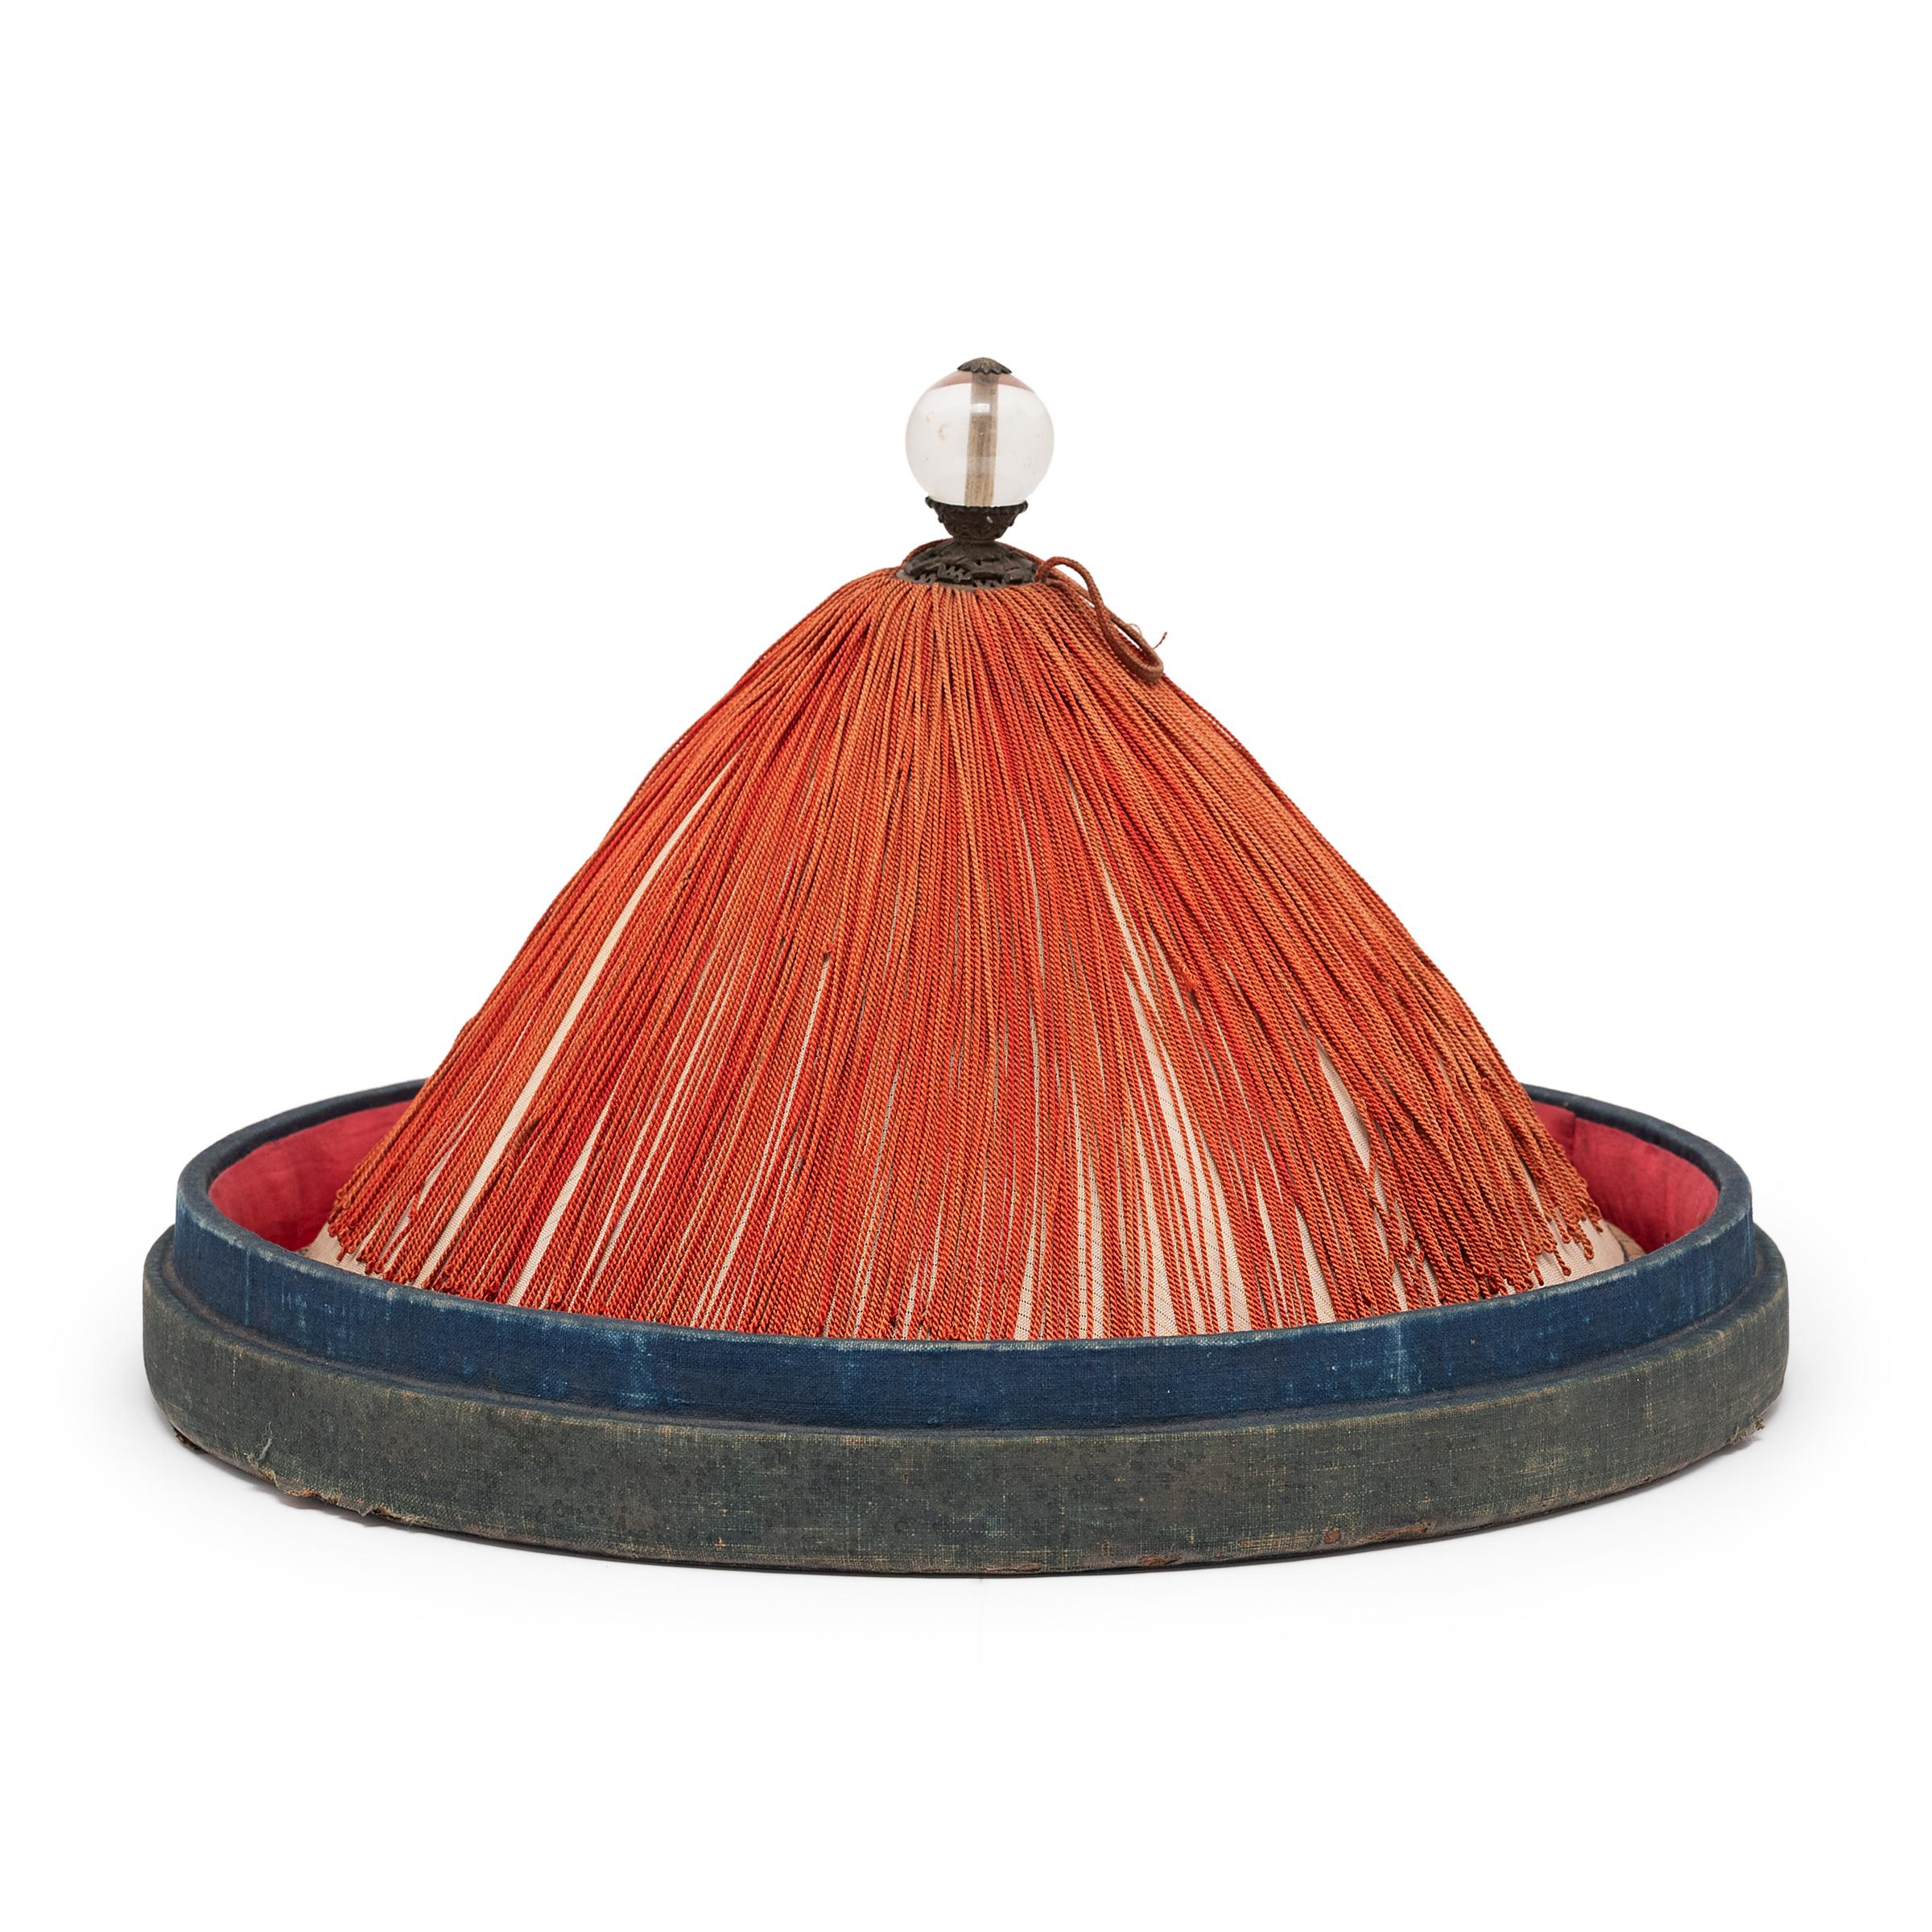 No self-respecting man in Qing-dynasty China would leave the house without some kind of hat. Headgear was central to social status and those of title relied on their hat to convey their rank and cultural identity. This conical hat is the summer hat